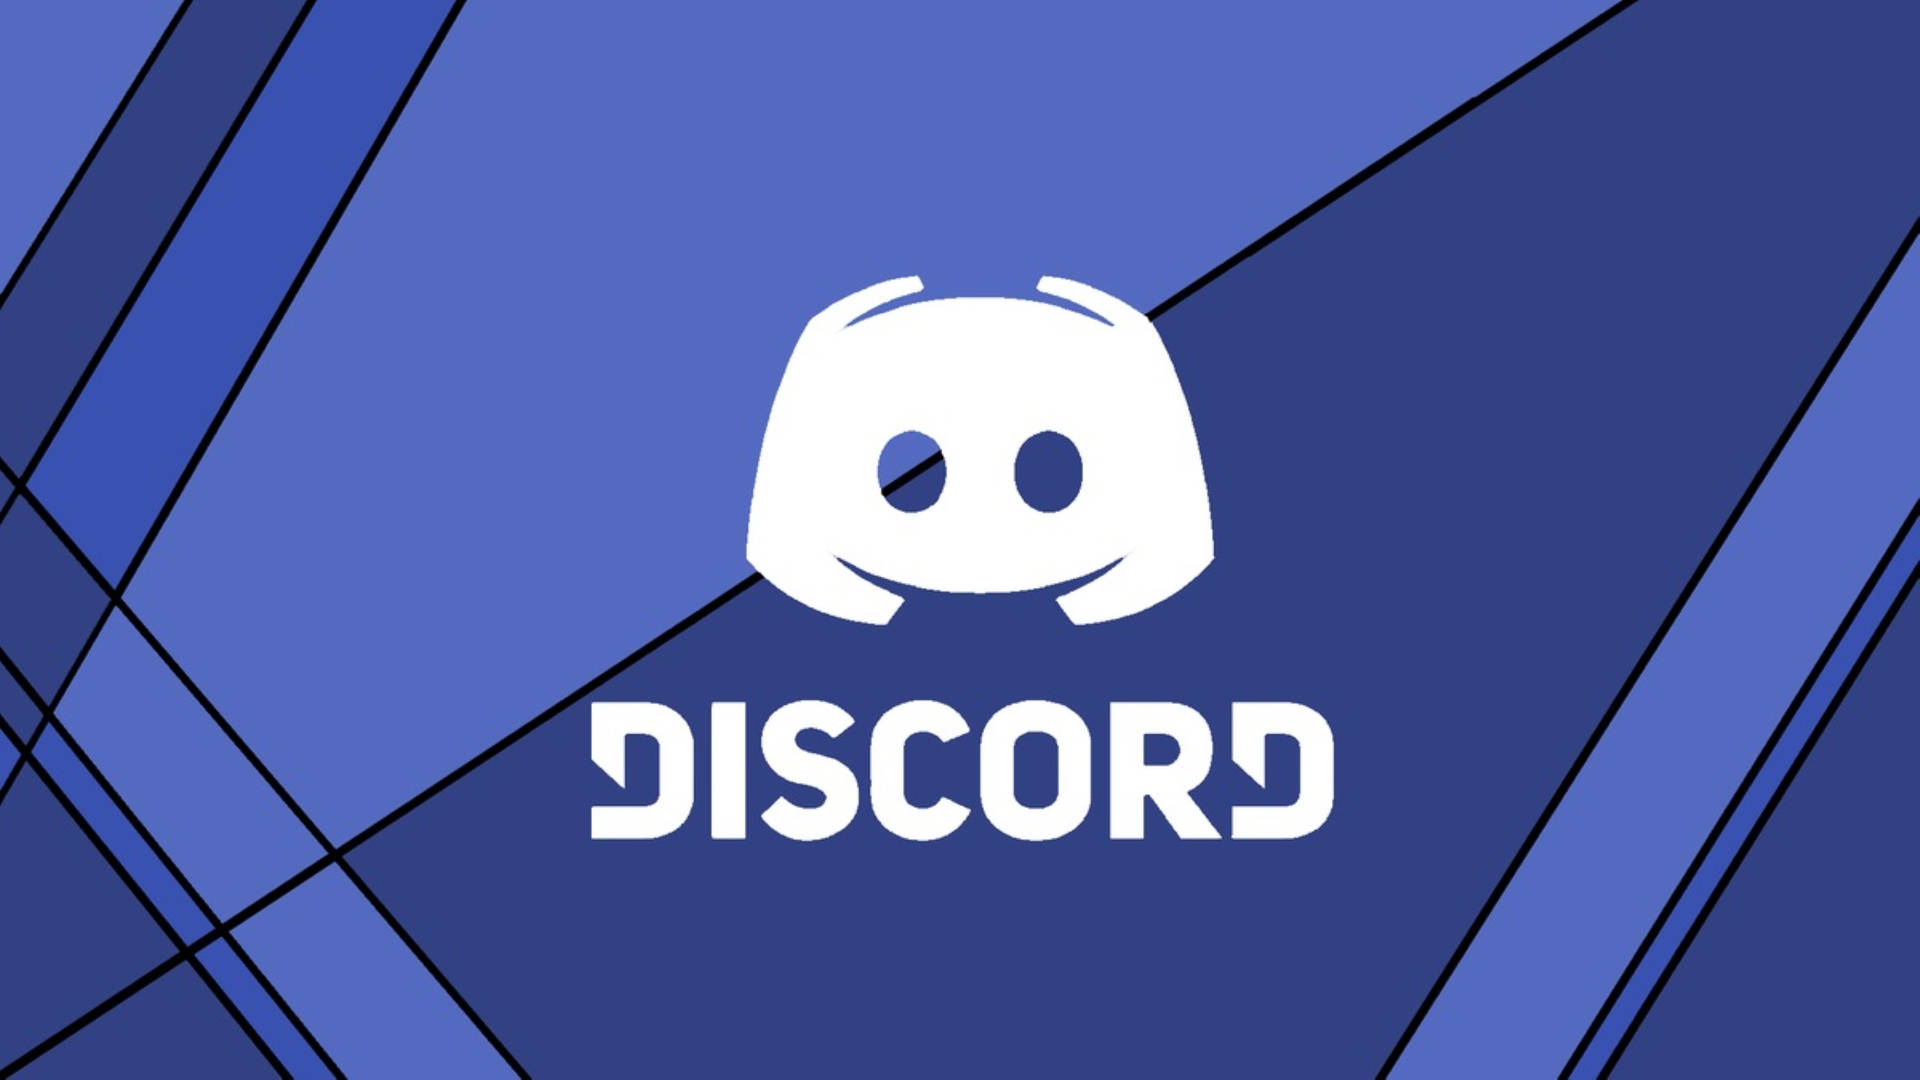 Top 999+ Discord Wallpapers Full HD, 4K✅Free to Use